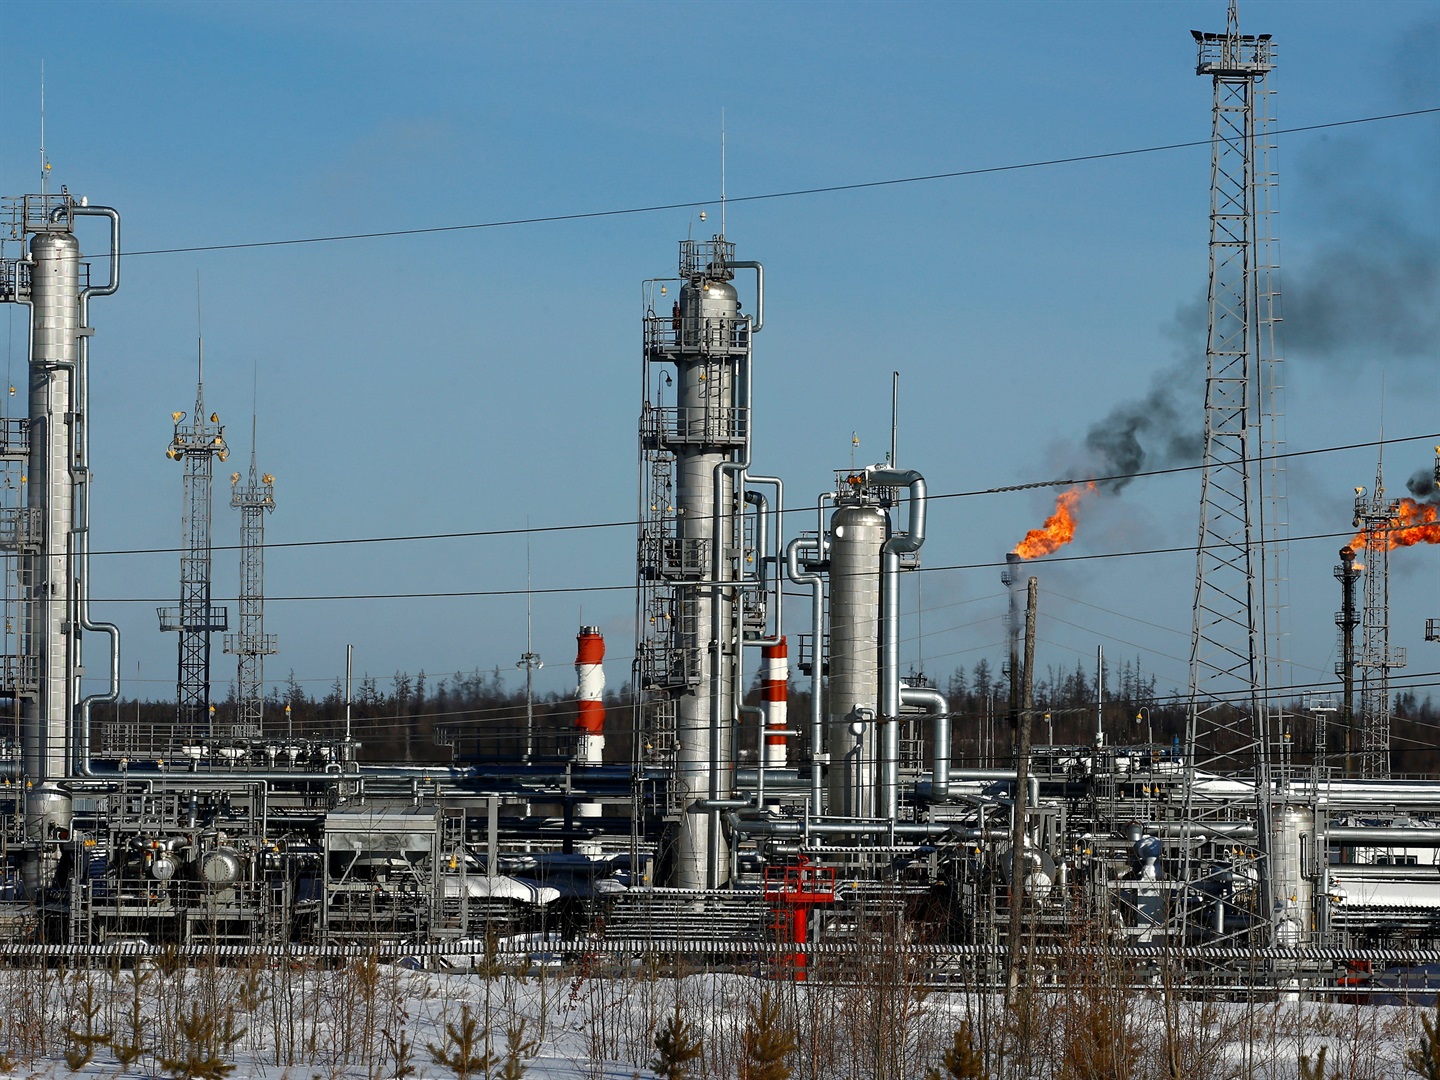 A general view shows a natural and associated petroleum gas processing plant in the Yarakta Oil Field, owned by Irkutsk Oil Company (INK), in Irkutsk Region, Russia March 11, 2019.